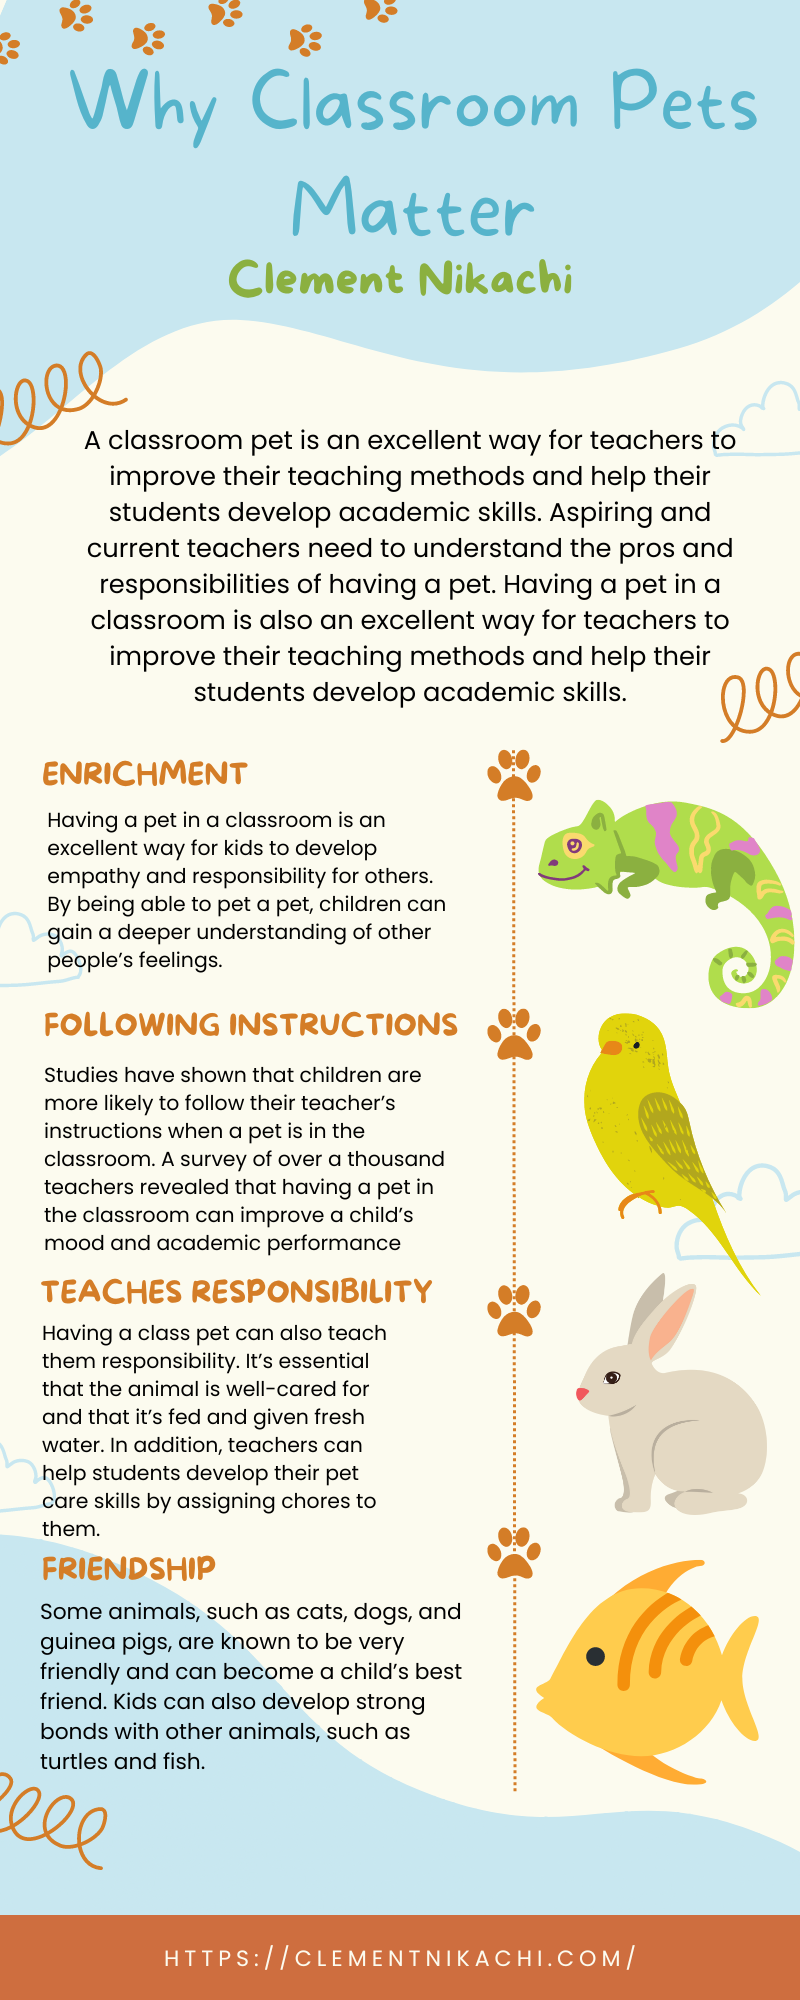 Why Classroom Pets Matter